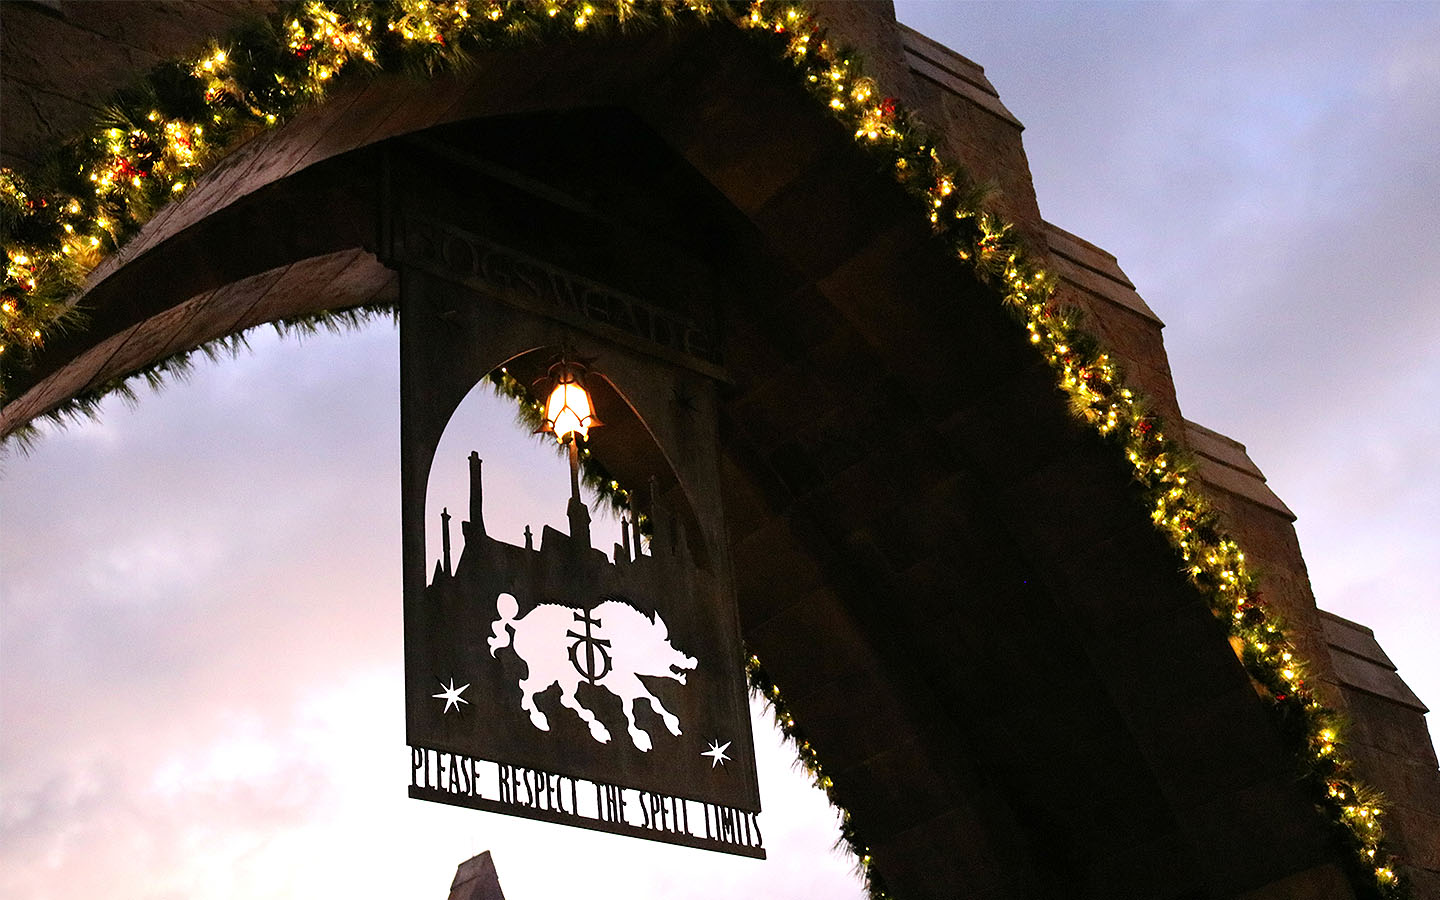 Christmas decor at The Wizarding World of Harry Potter - Hogsmeade